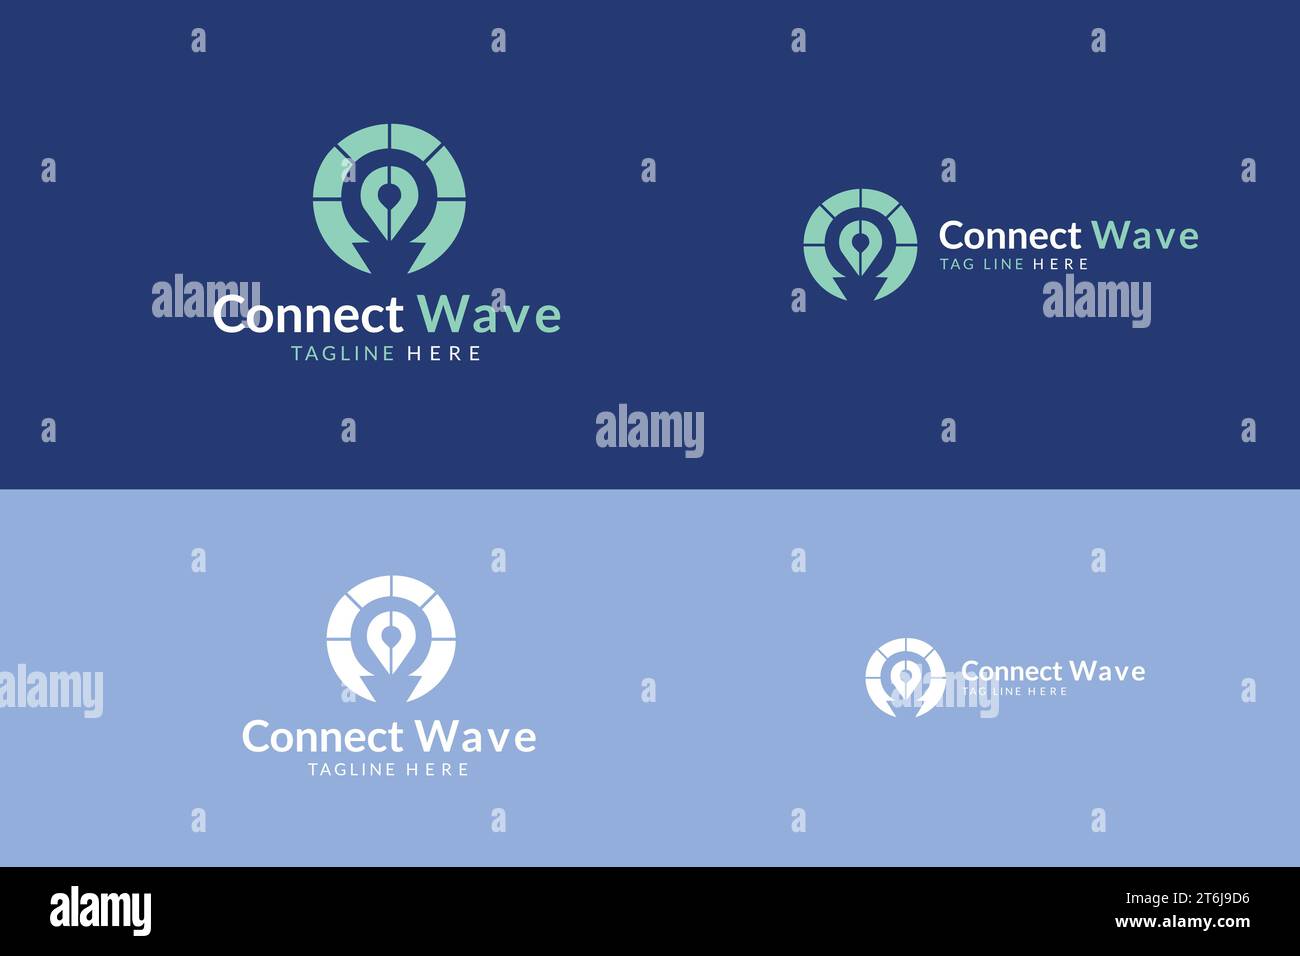 Connect wave communication logo template Stock Vector